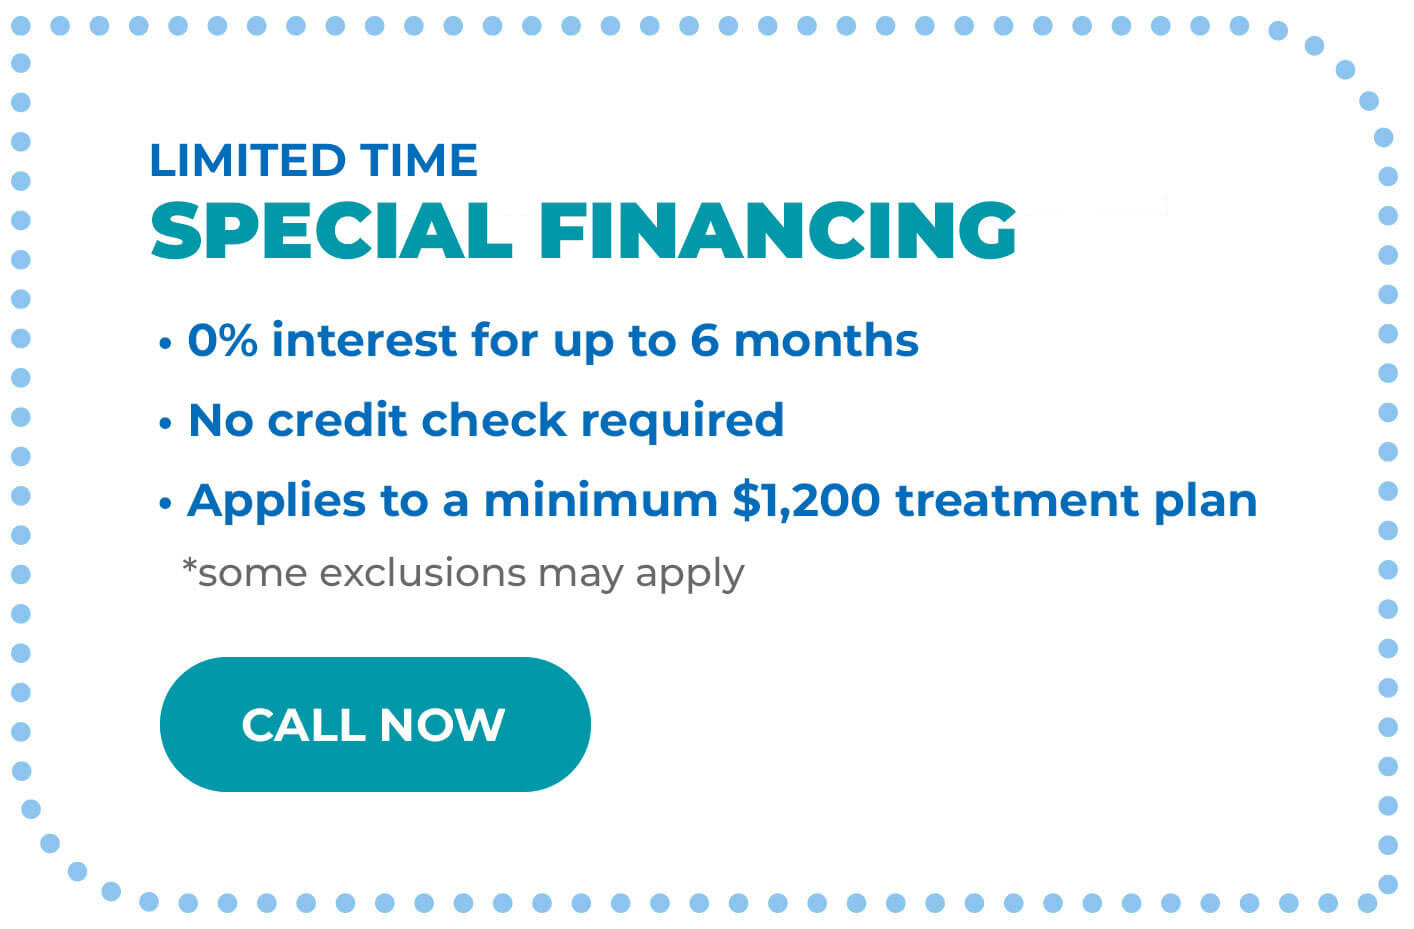 Limited Time special financing - Call Now